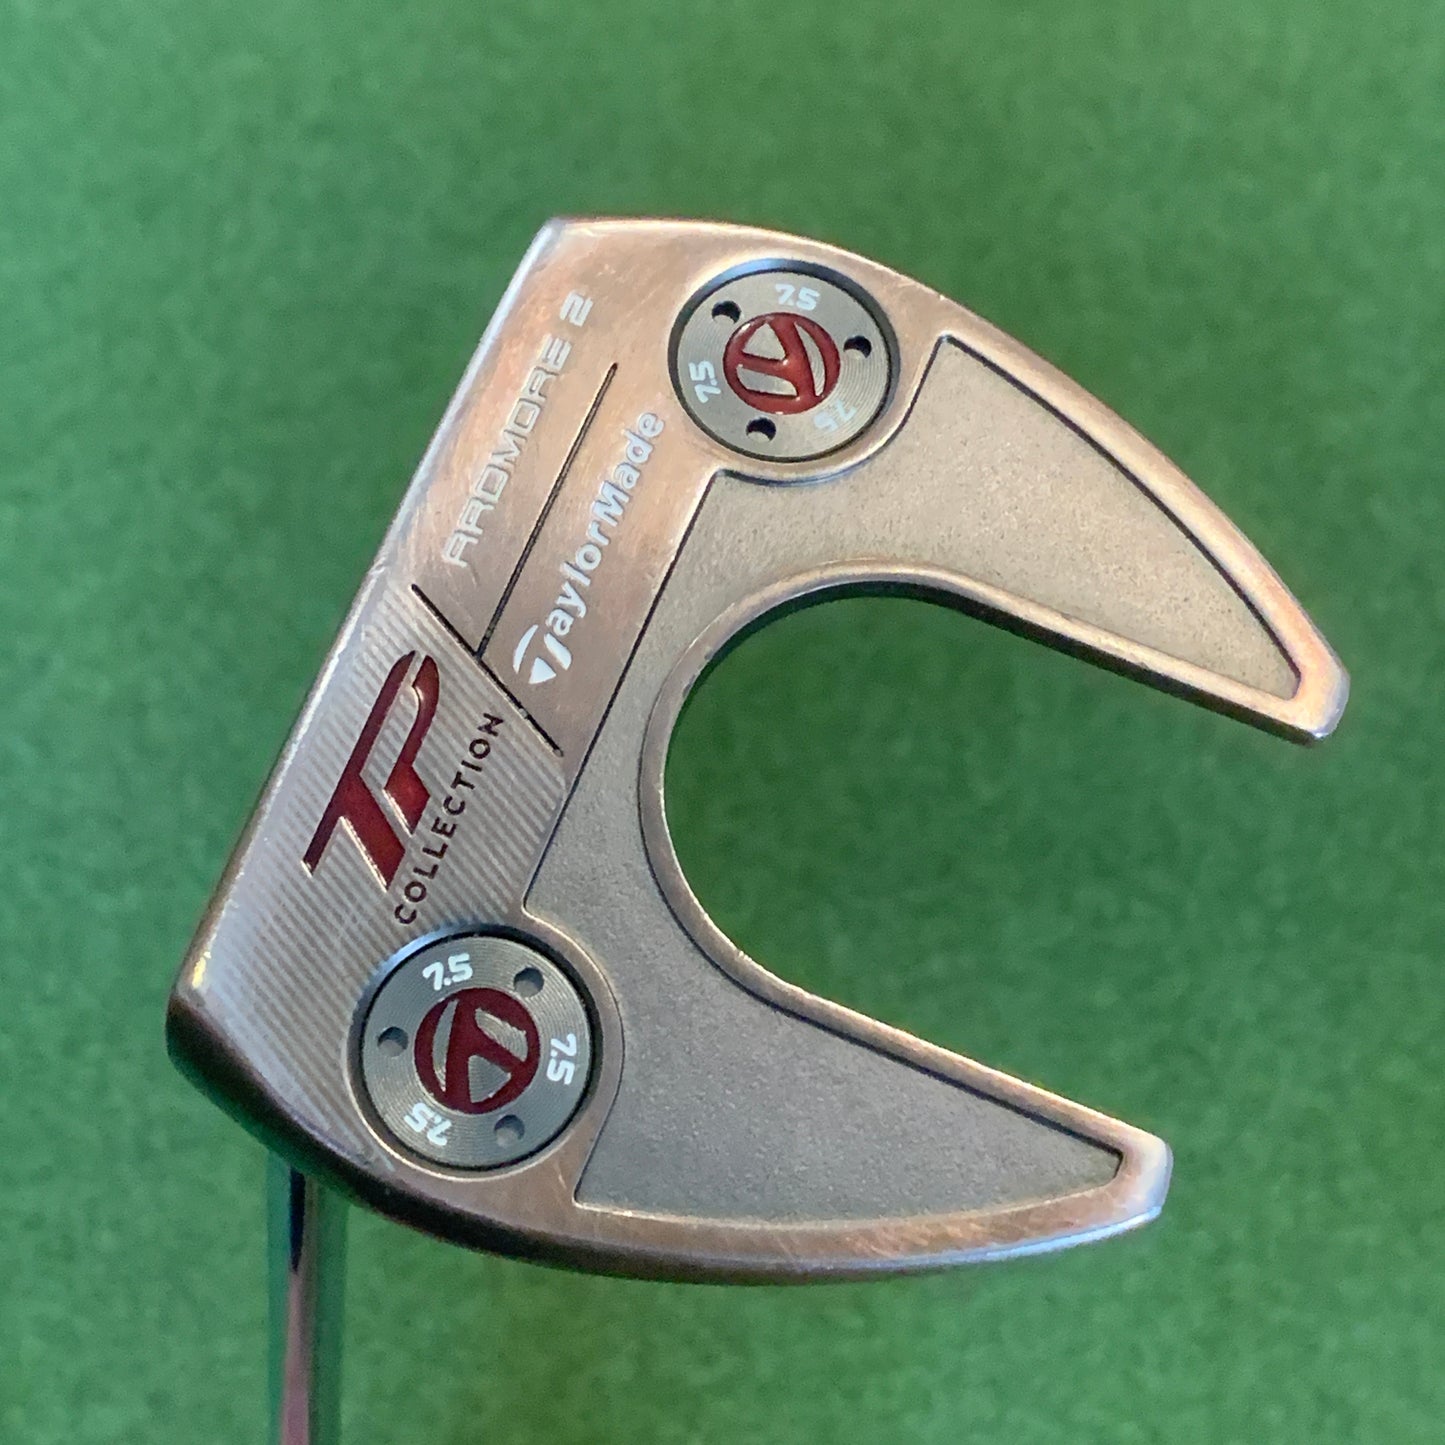 LH Taylormade Ardmore 2 TP Collection Putter